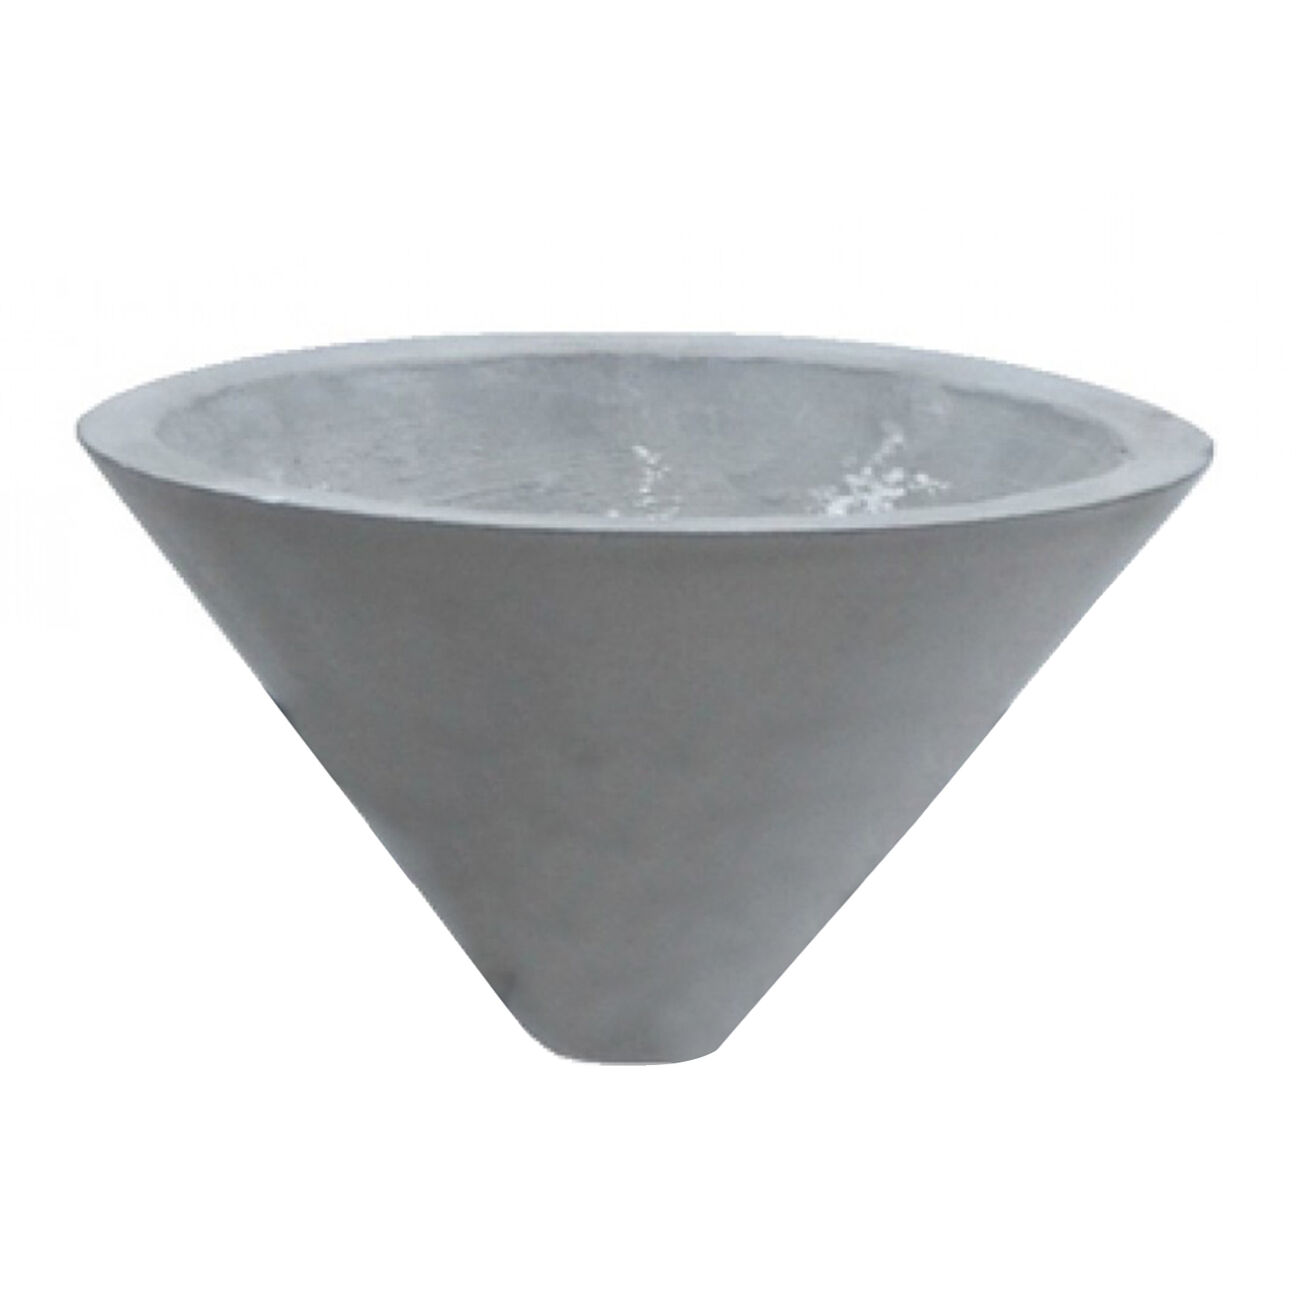 Modern Cone Shaped Concrete Planter with Metal Stand, Gray and Black - BM219229